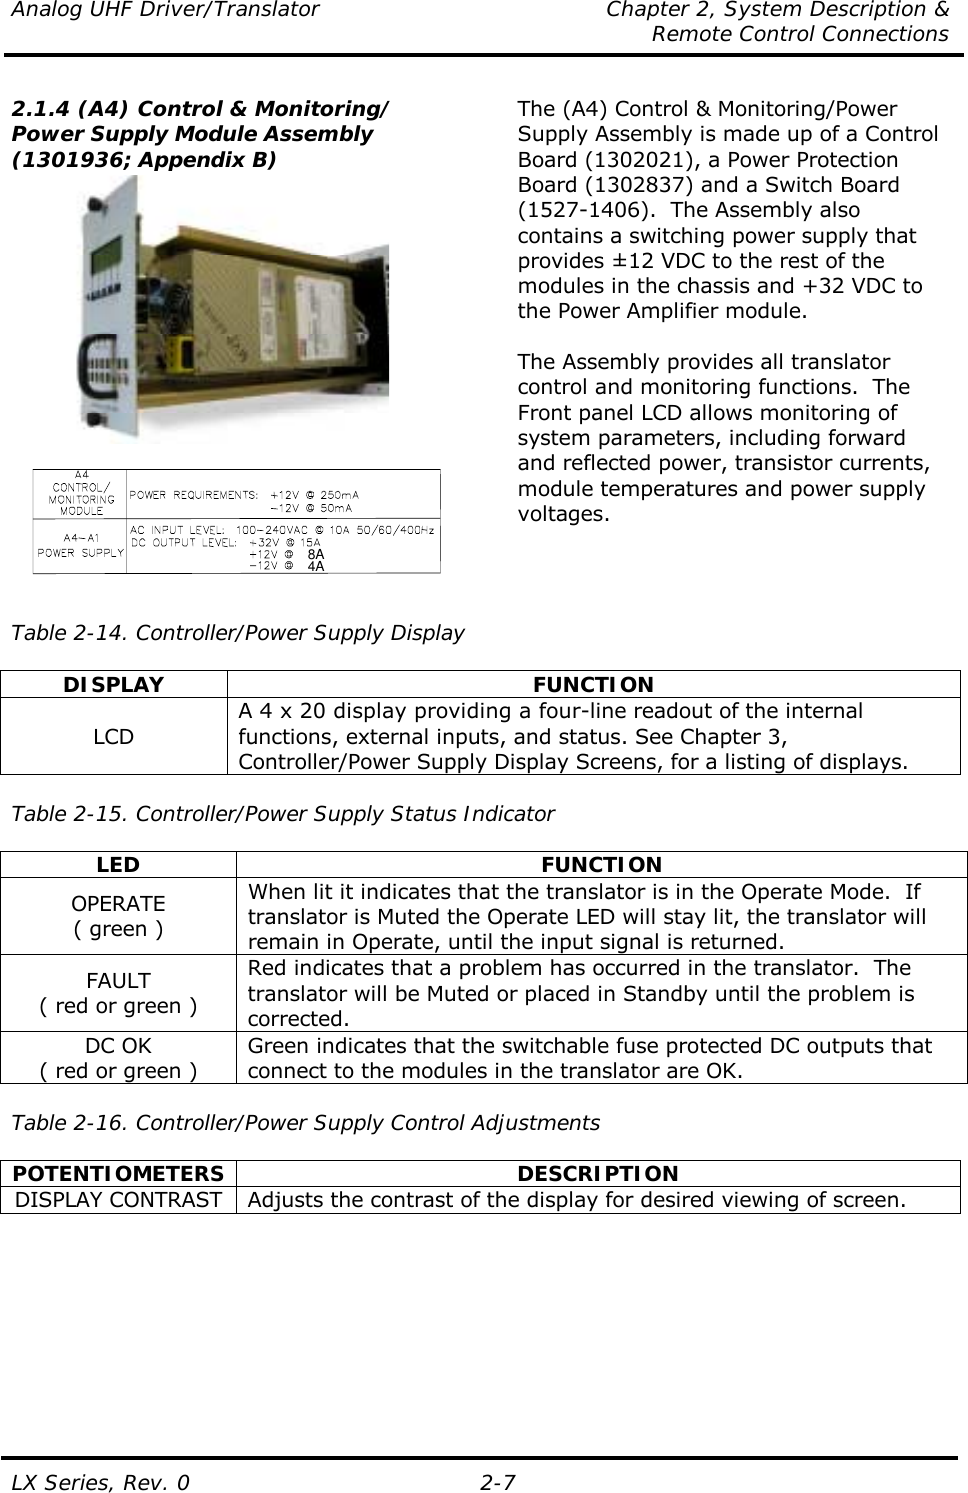 Analog UHF Driver/Translator  Chapter 2, System Description &amp;   Remote Control Connections LX Series, Rev. 0  2-7  2.1.4 (A4) Control &amp; Monitoring/ Power Supply Module Assembly (1301936; Appendix B)    8 A4 A The (A4) Control &amp; Monitoring/Power Supply Assembly is made up of a Control Board (1302021), a Power Protection Board (1302837) and a Switch Board (1527-1406).  The Assembly also contains a switching power supply that provides ±12 VDC to the rest of the modules in the chassis and +32 VDC to the Power Amplifier module.  The Assembly provides all translator control and monitoring functions.  The Front panel LCD allows monitoring of system parameters, including forward and reflected power, transistor currents, module temperatures and power supply voltages.  Table 2-14. Controller/Power Supply Display  DISPLAY FUNCTION LCD A 4 x 20 display providing a four-line readout of the internal functions, external inputs, and status. See Chapter 3, Controller/Power Supply Display Screens, for a listing of displays.  Table 2-15. Controller/Power Supply Status Indicator  LED FUNCTION OPERATE ( green ) When lit it indicates that the translator is in the Operate Mode.  If translator is Muted the Operate LED will stay lit, the translator will remain in Operate, until the input signal is returned. FAULT ( red or green ) Red indicates that a problem has occurred in the translator.  The translator will be Muted or placed in Standby until the problem is corrected. DC OK ( red or green ) Green indicates that the switchable fuse protected DC outputs that connect to the modules in the translator are OK.  Table 2-16. Controller/Power Supply Control Adjustments  POTENTIOMETERS DESCRIPTION DISPLAY CONTRAST  Adjusts the contrast of the display for desired viewing of screen.  